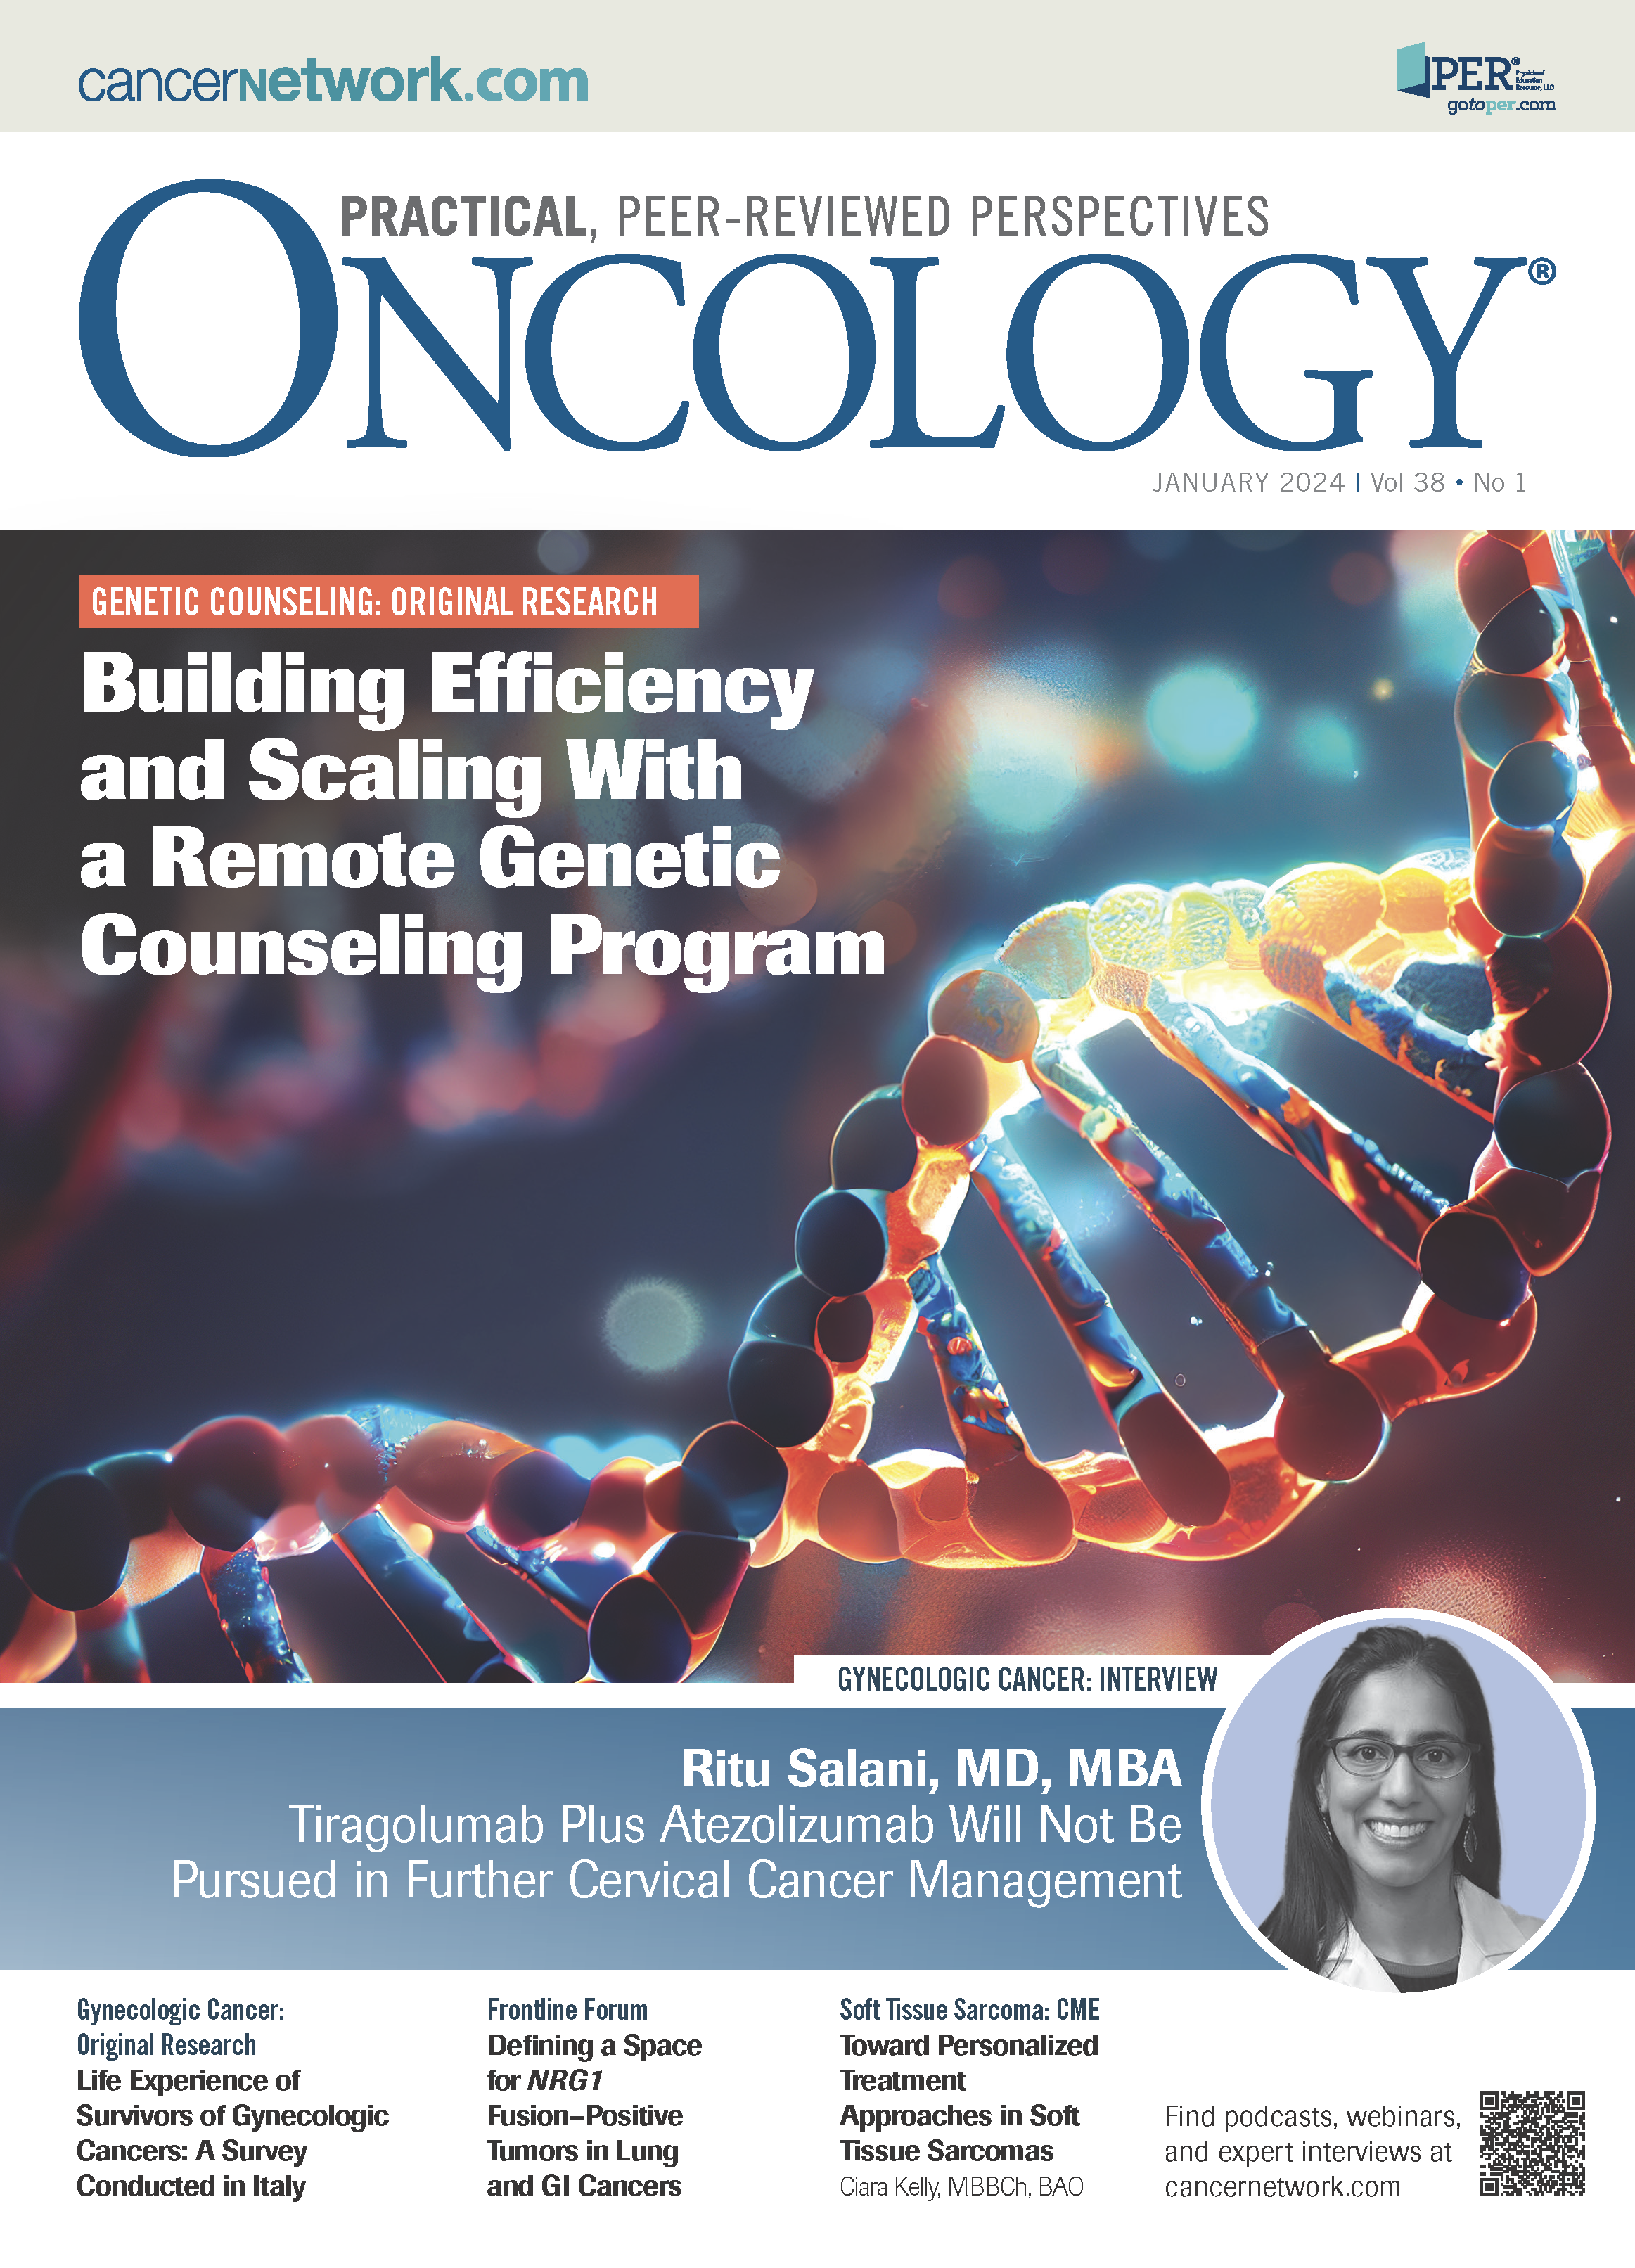 ONCOLOGY Vol 38, Issue 1